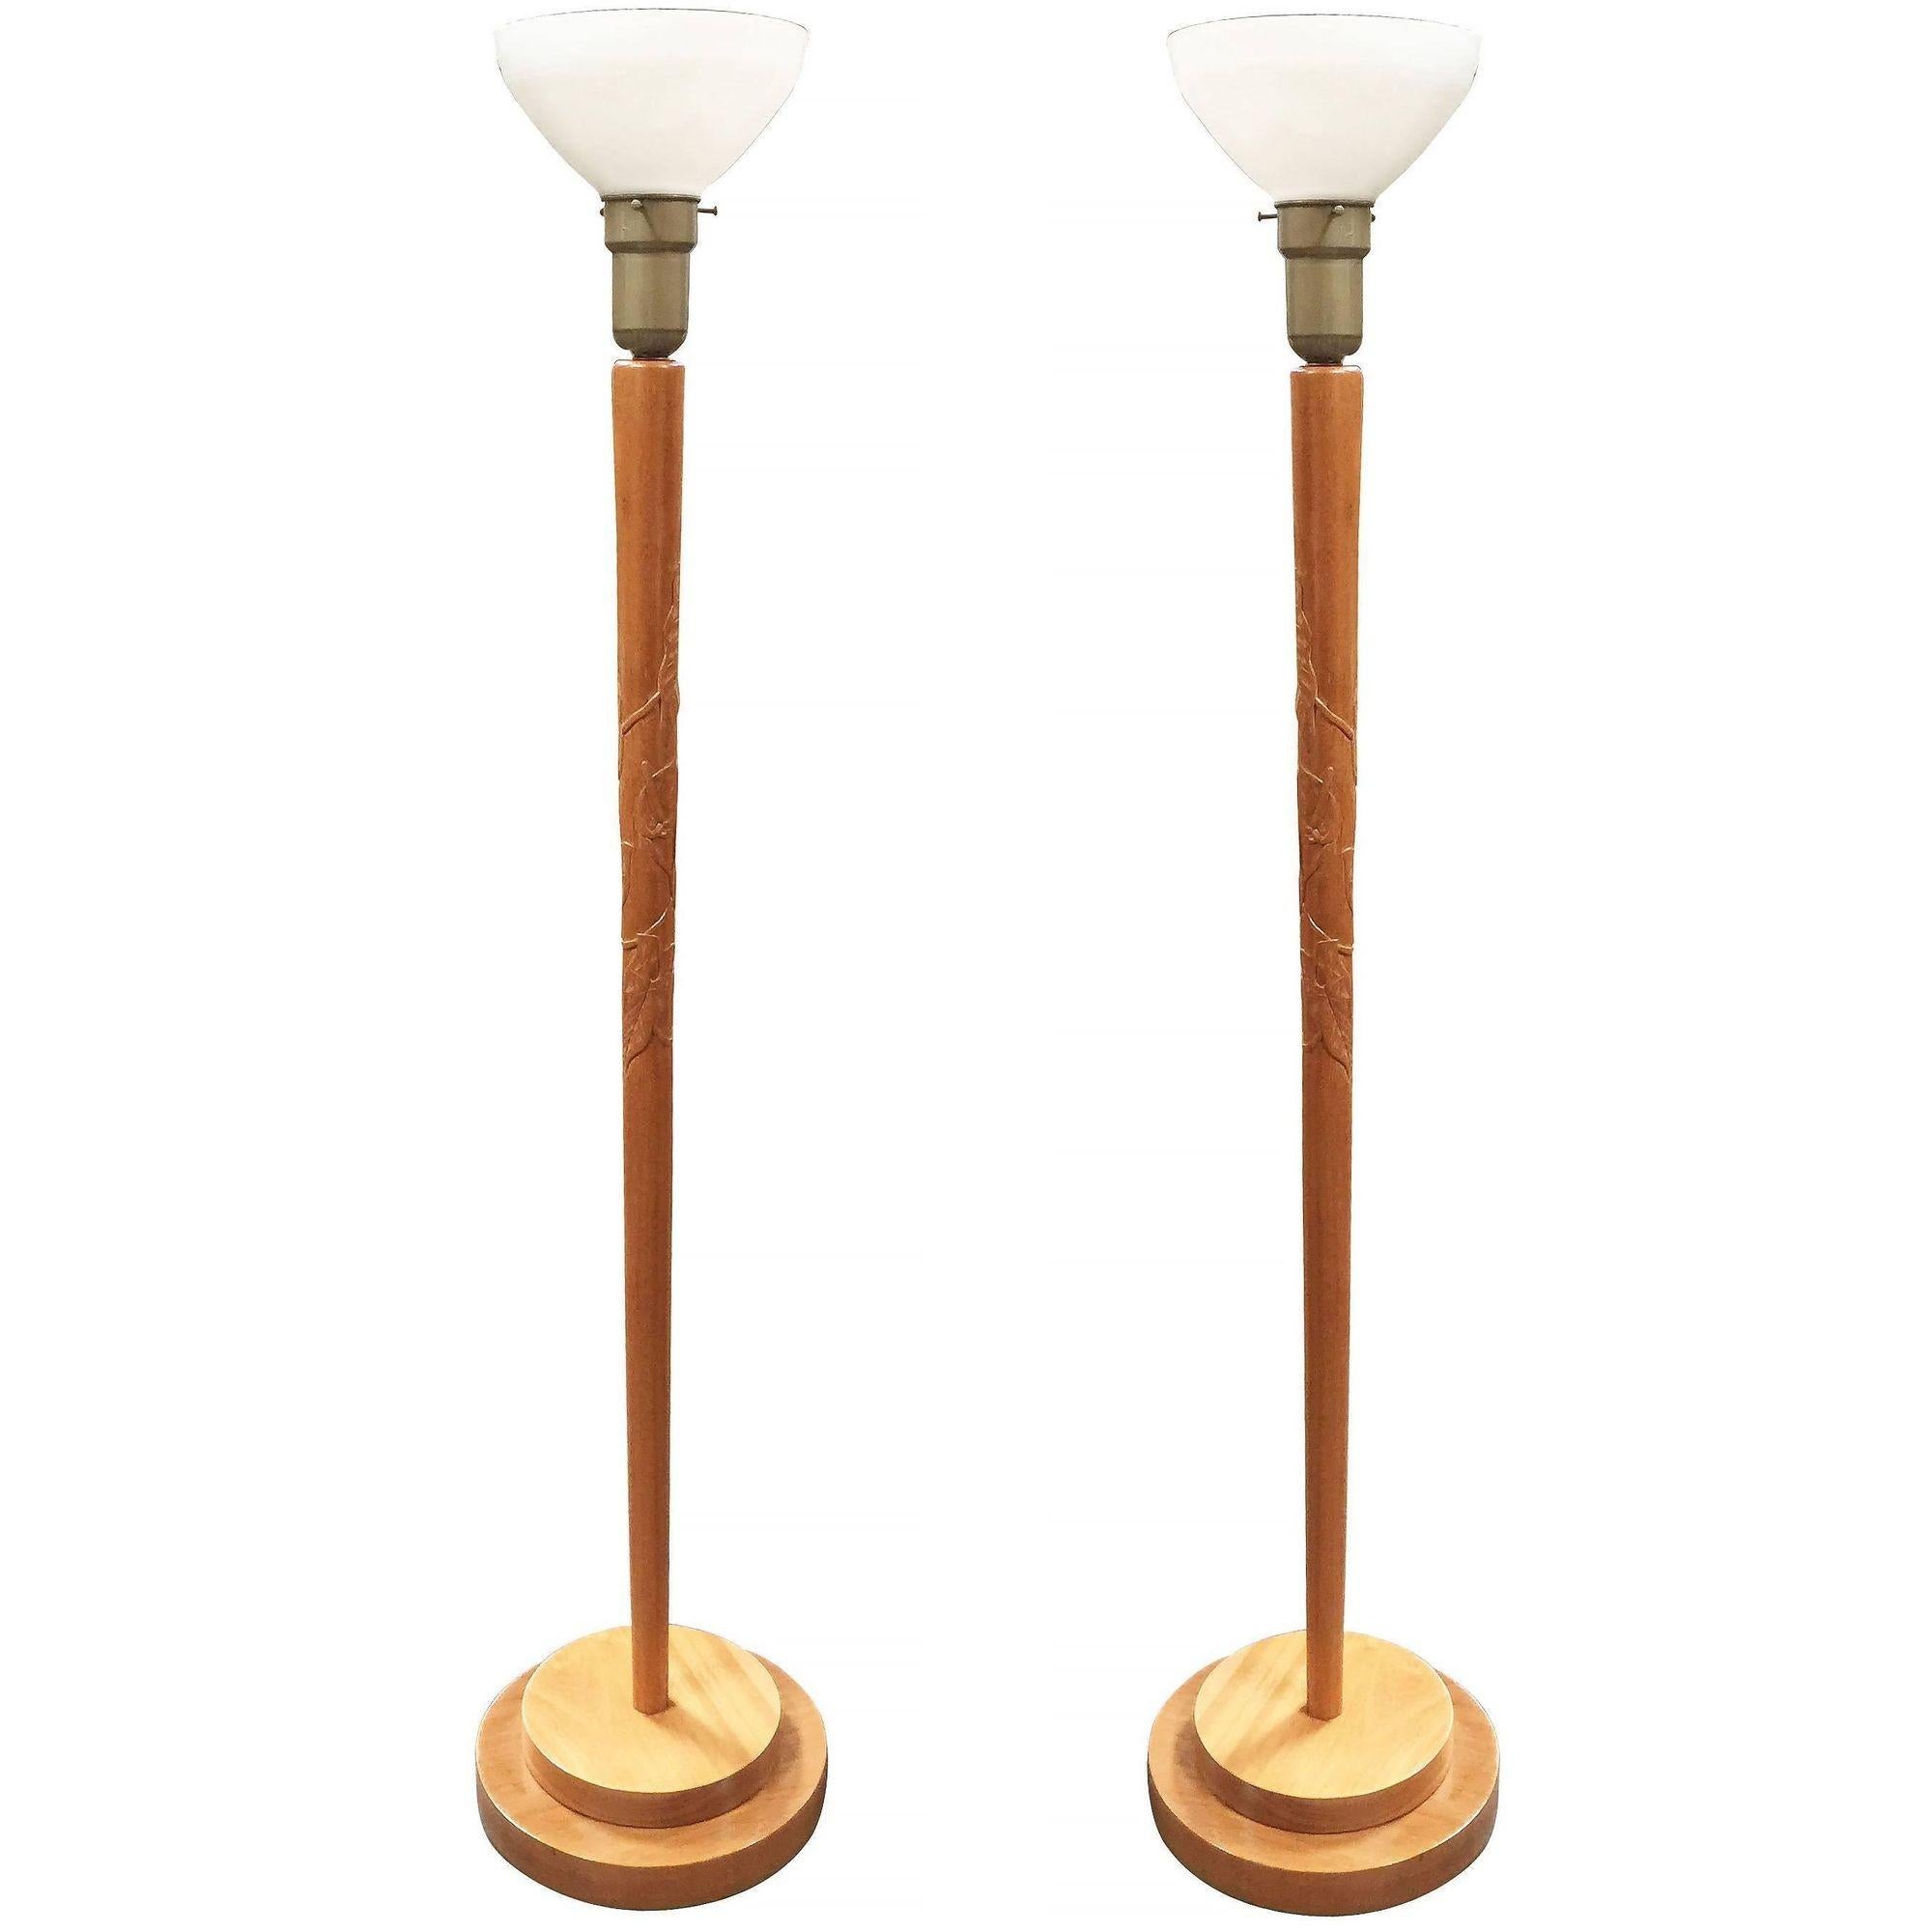 Mid-20th Century Russel Wright Style Hand-Carved Torchiere Floor Lamp, Pair For Sale